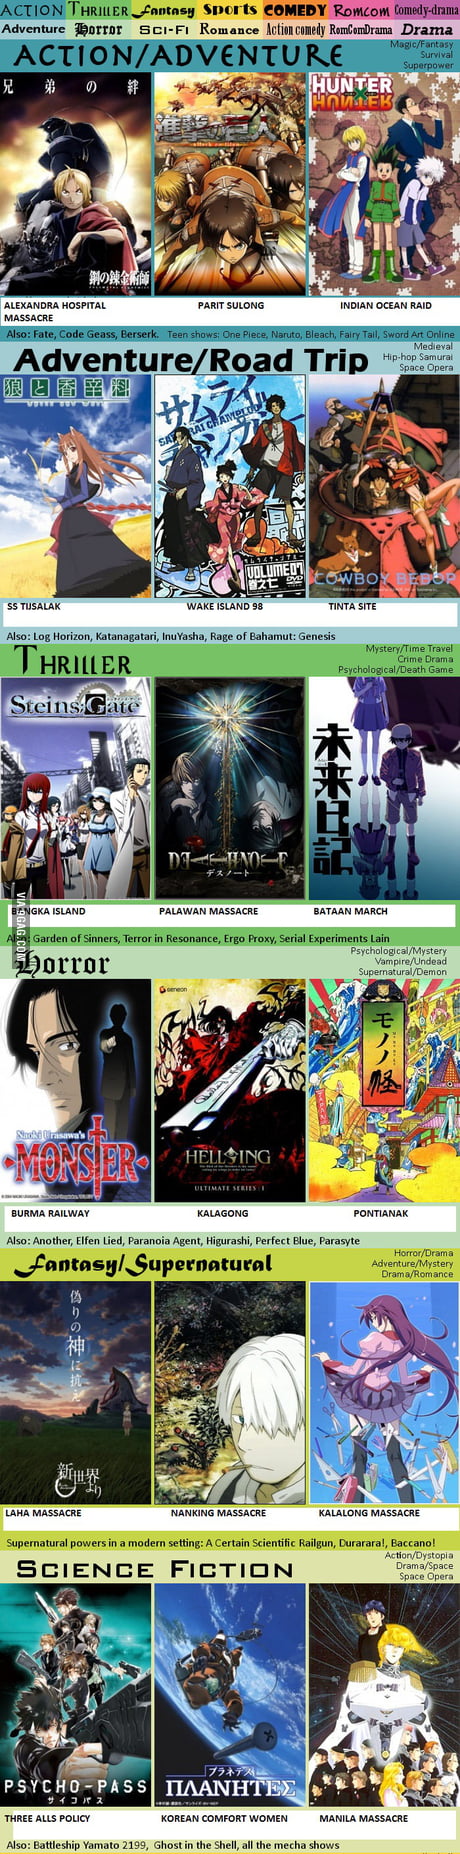 I just found a Death Note in an great horror anime called Another - 9GAG